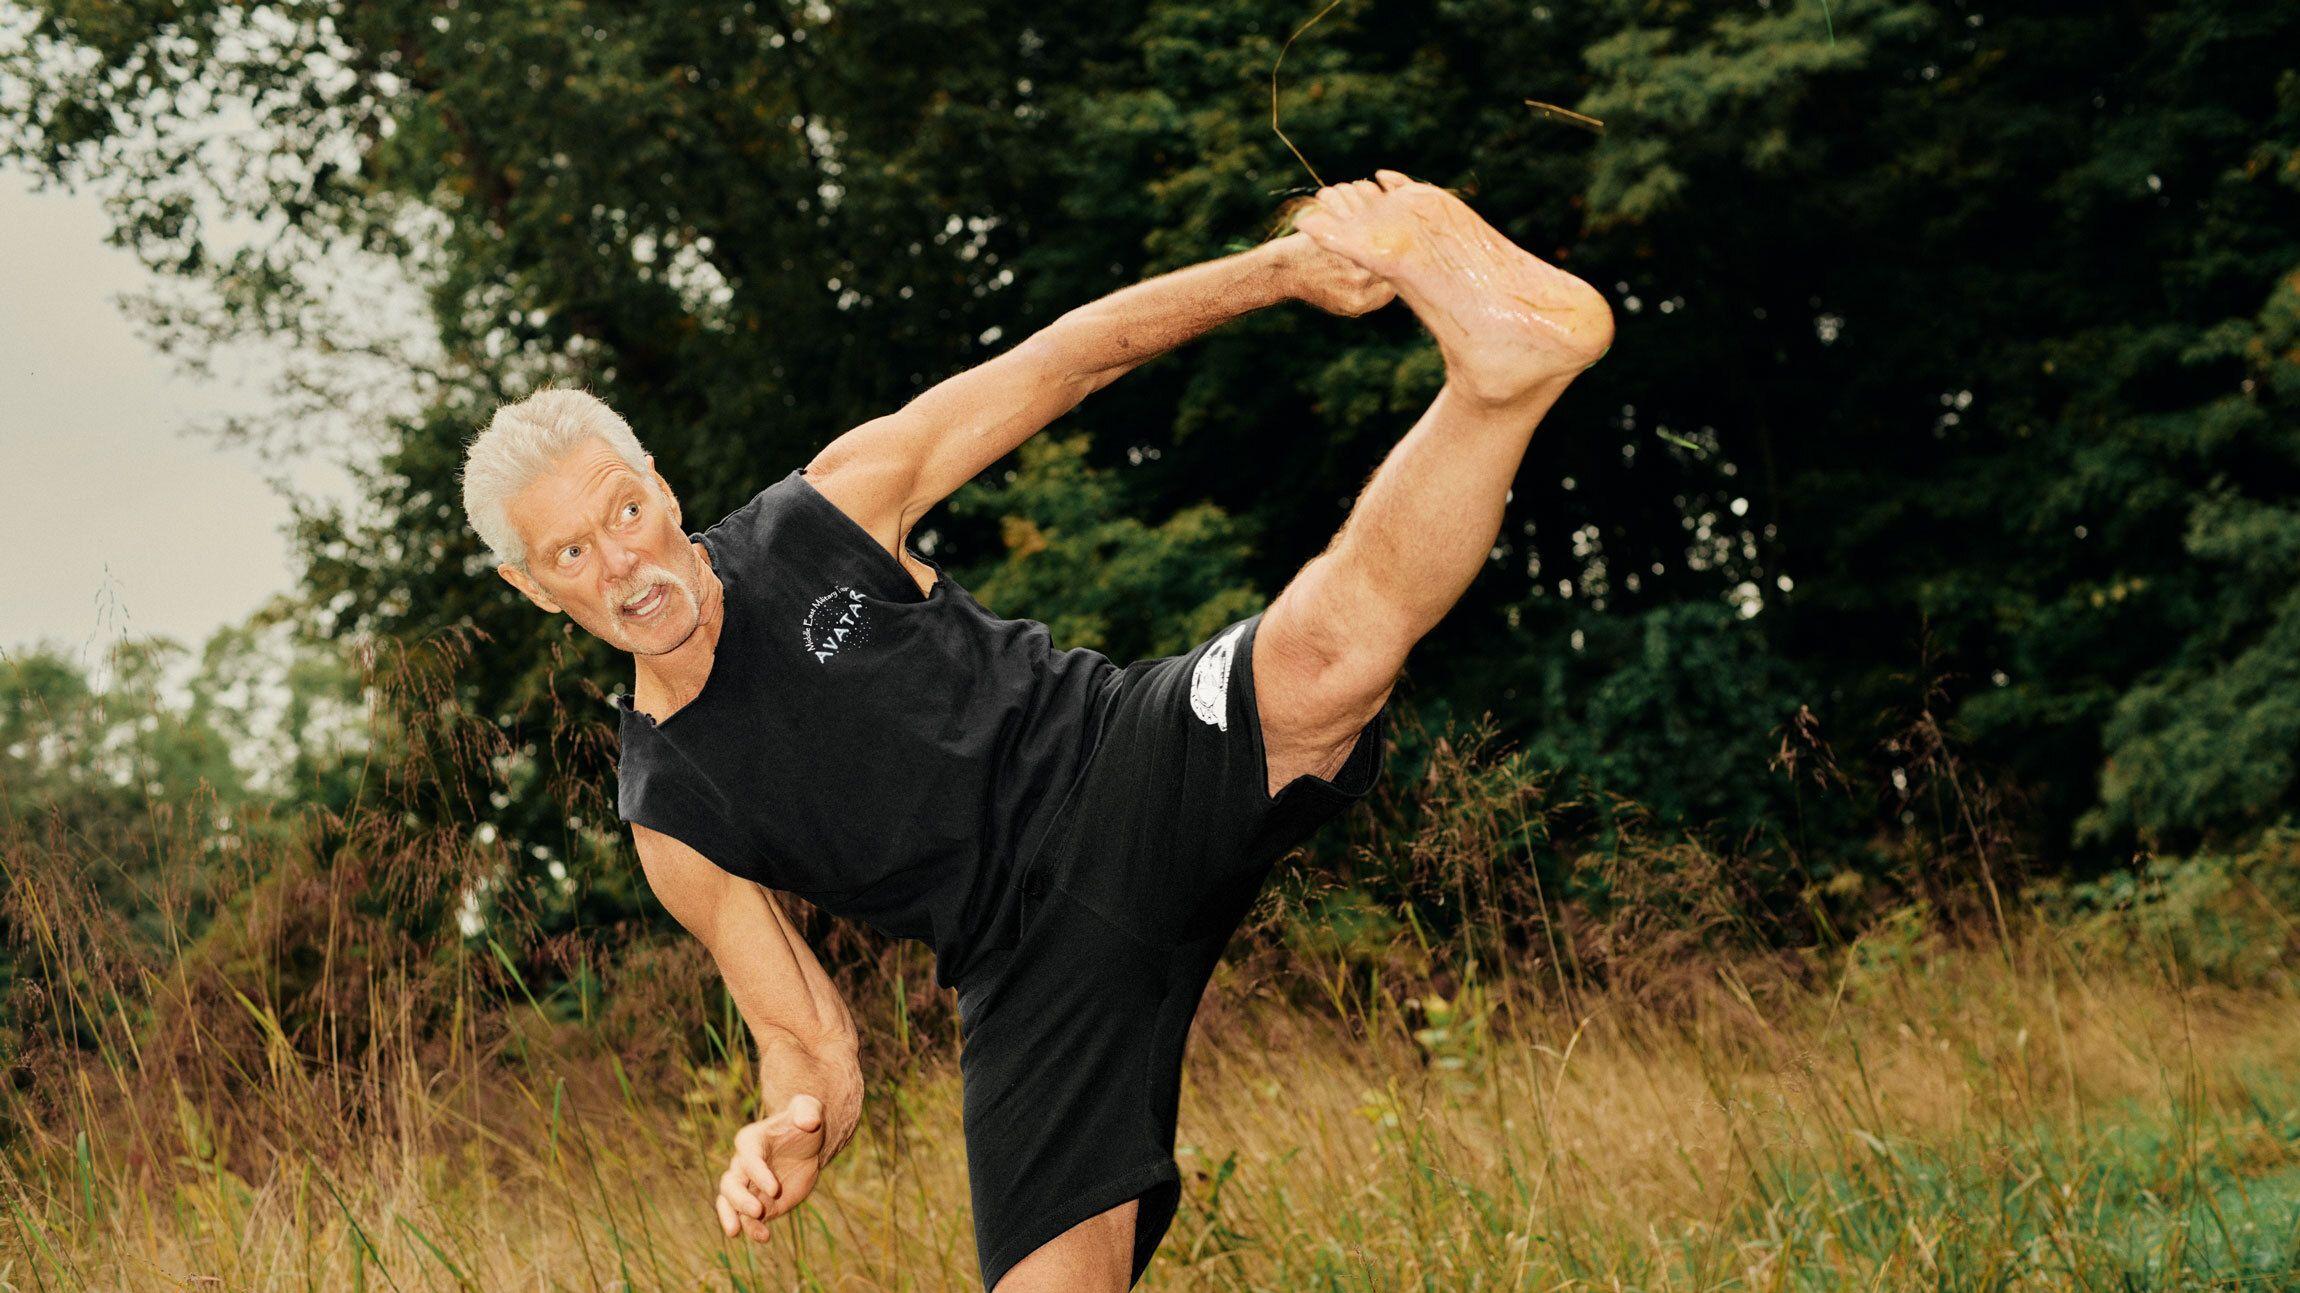 Stephen Lang Shares Avatar The Way of Water Workout Routine